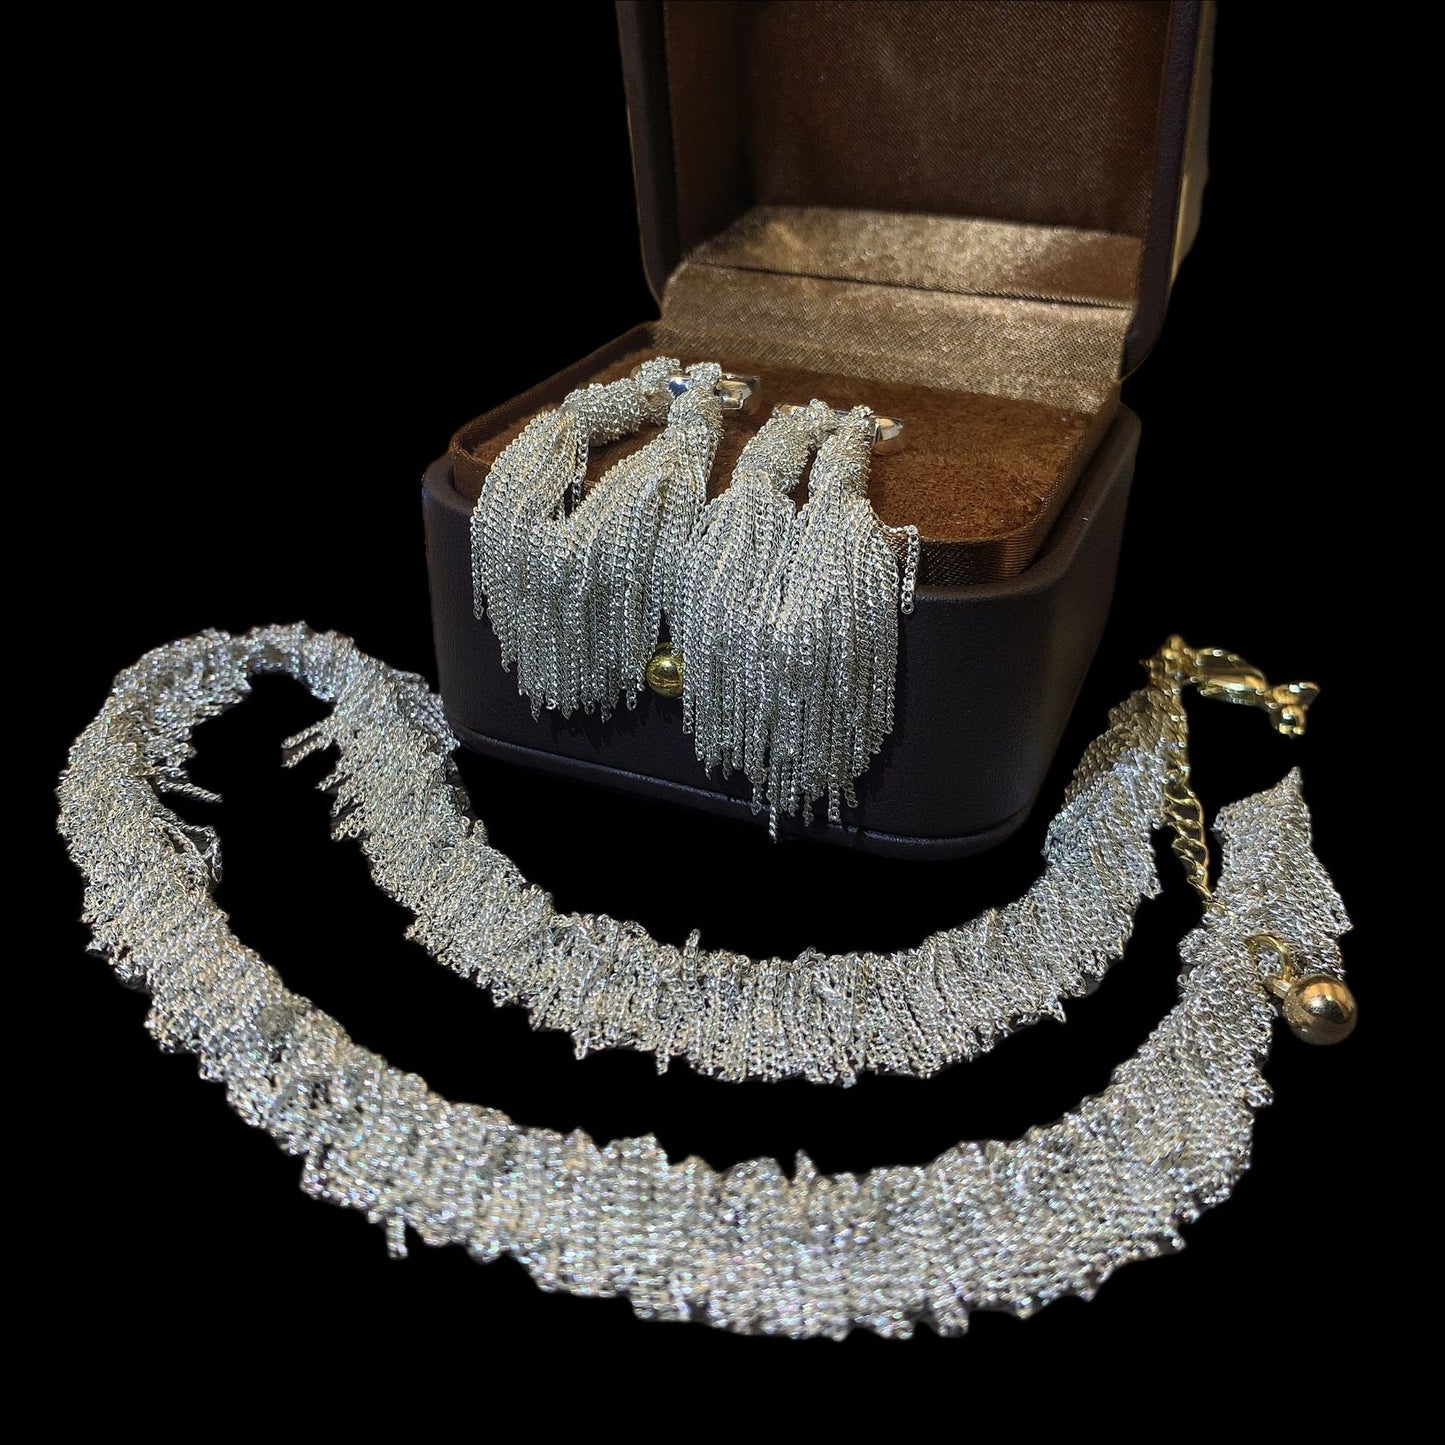 A High Luxury French Style Vintage Style Jewelry Set by Maramalive™ with tassels and tassels.